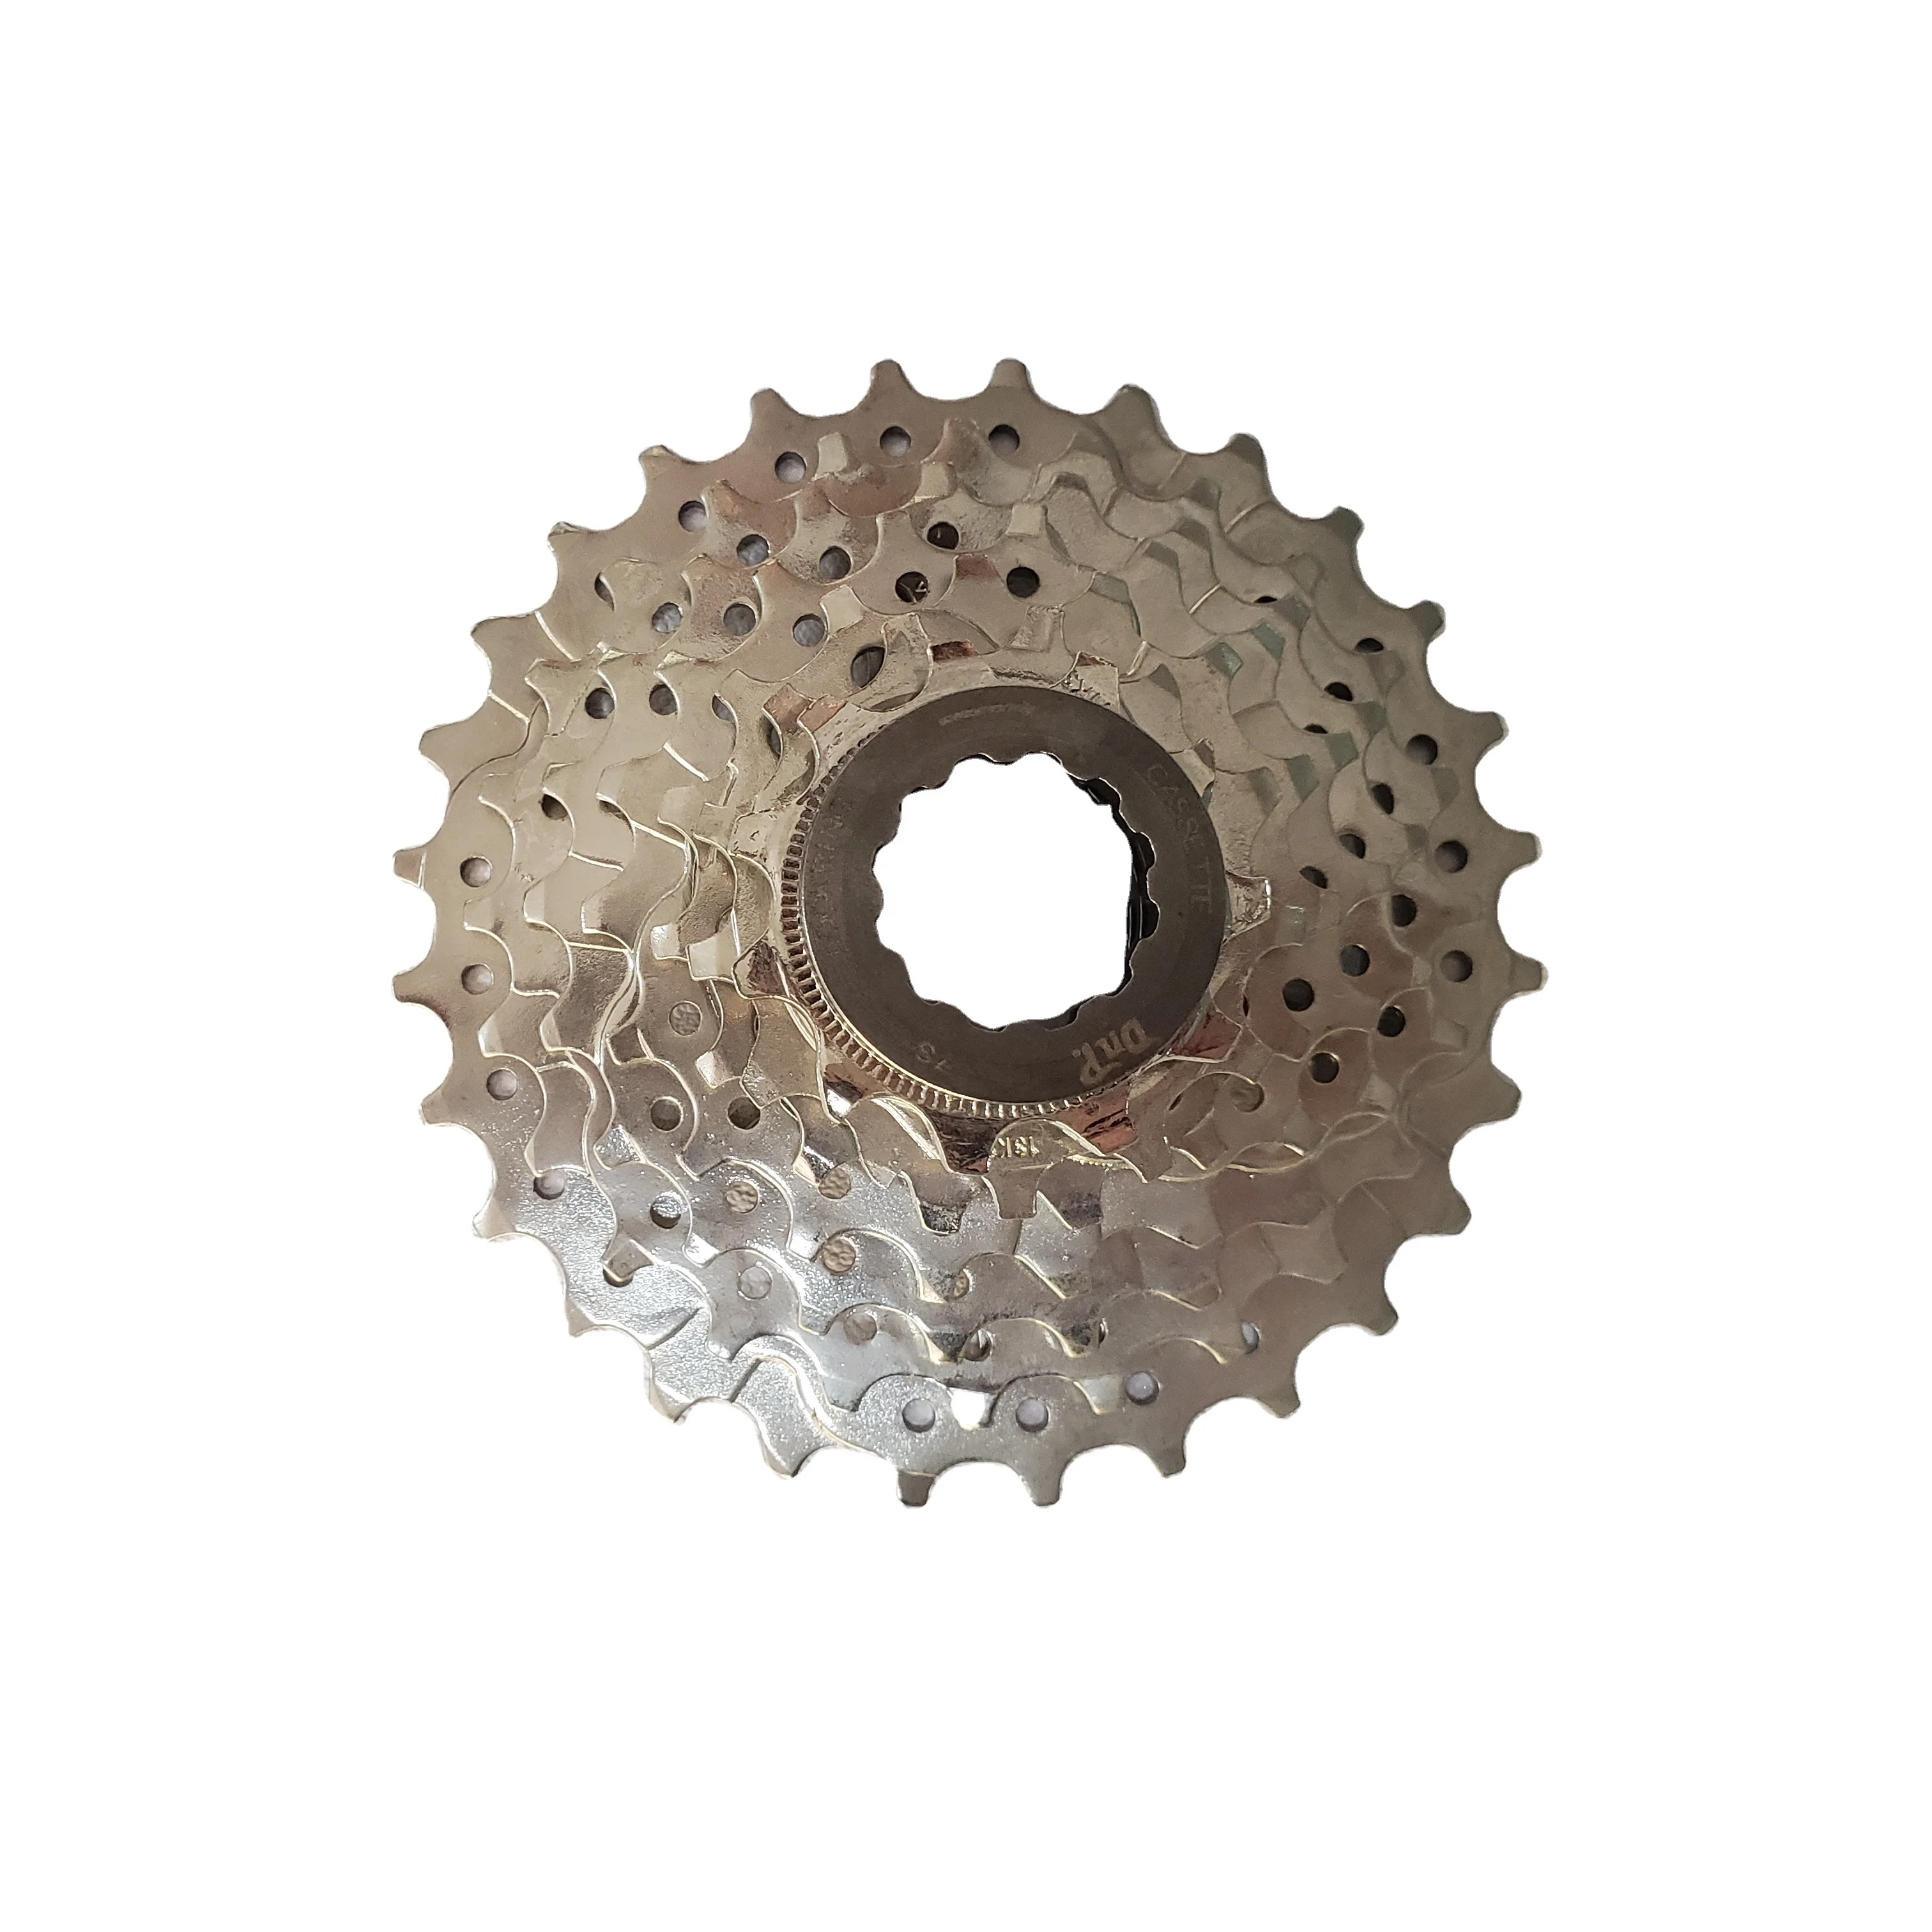 Hot sale 7 SPEED high quality antirust DNP cassettes brand from Taiwan 11 21T 11 28T 11 32T 11 34T (1600320527656)